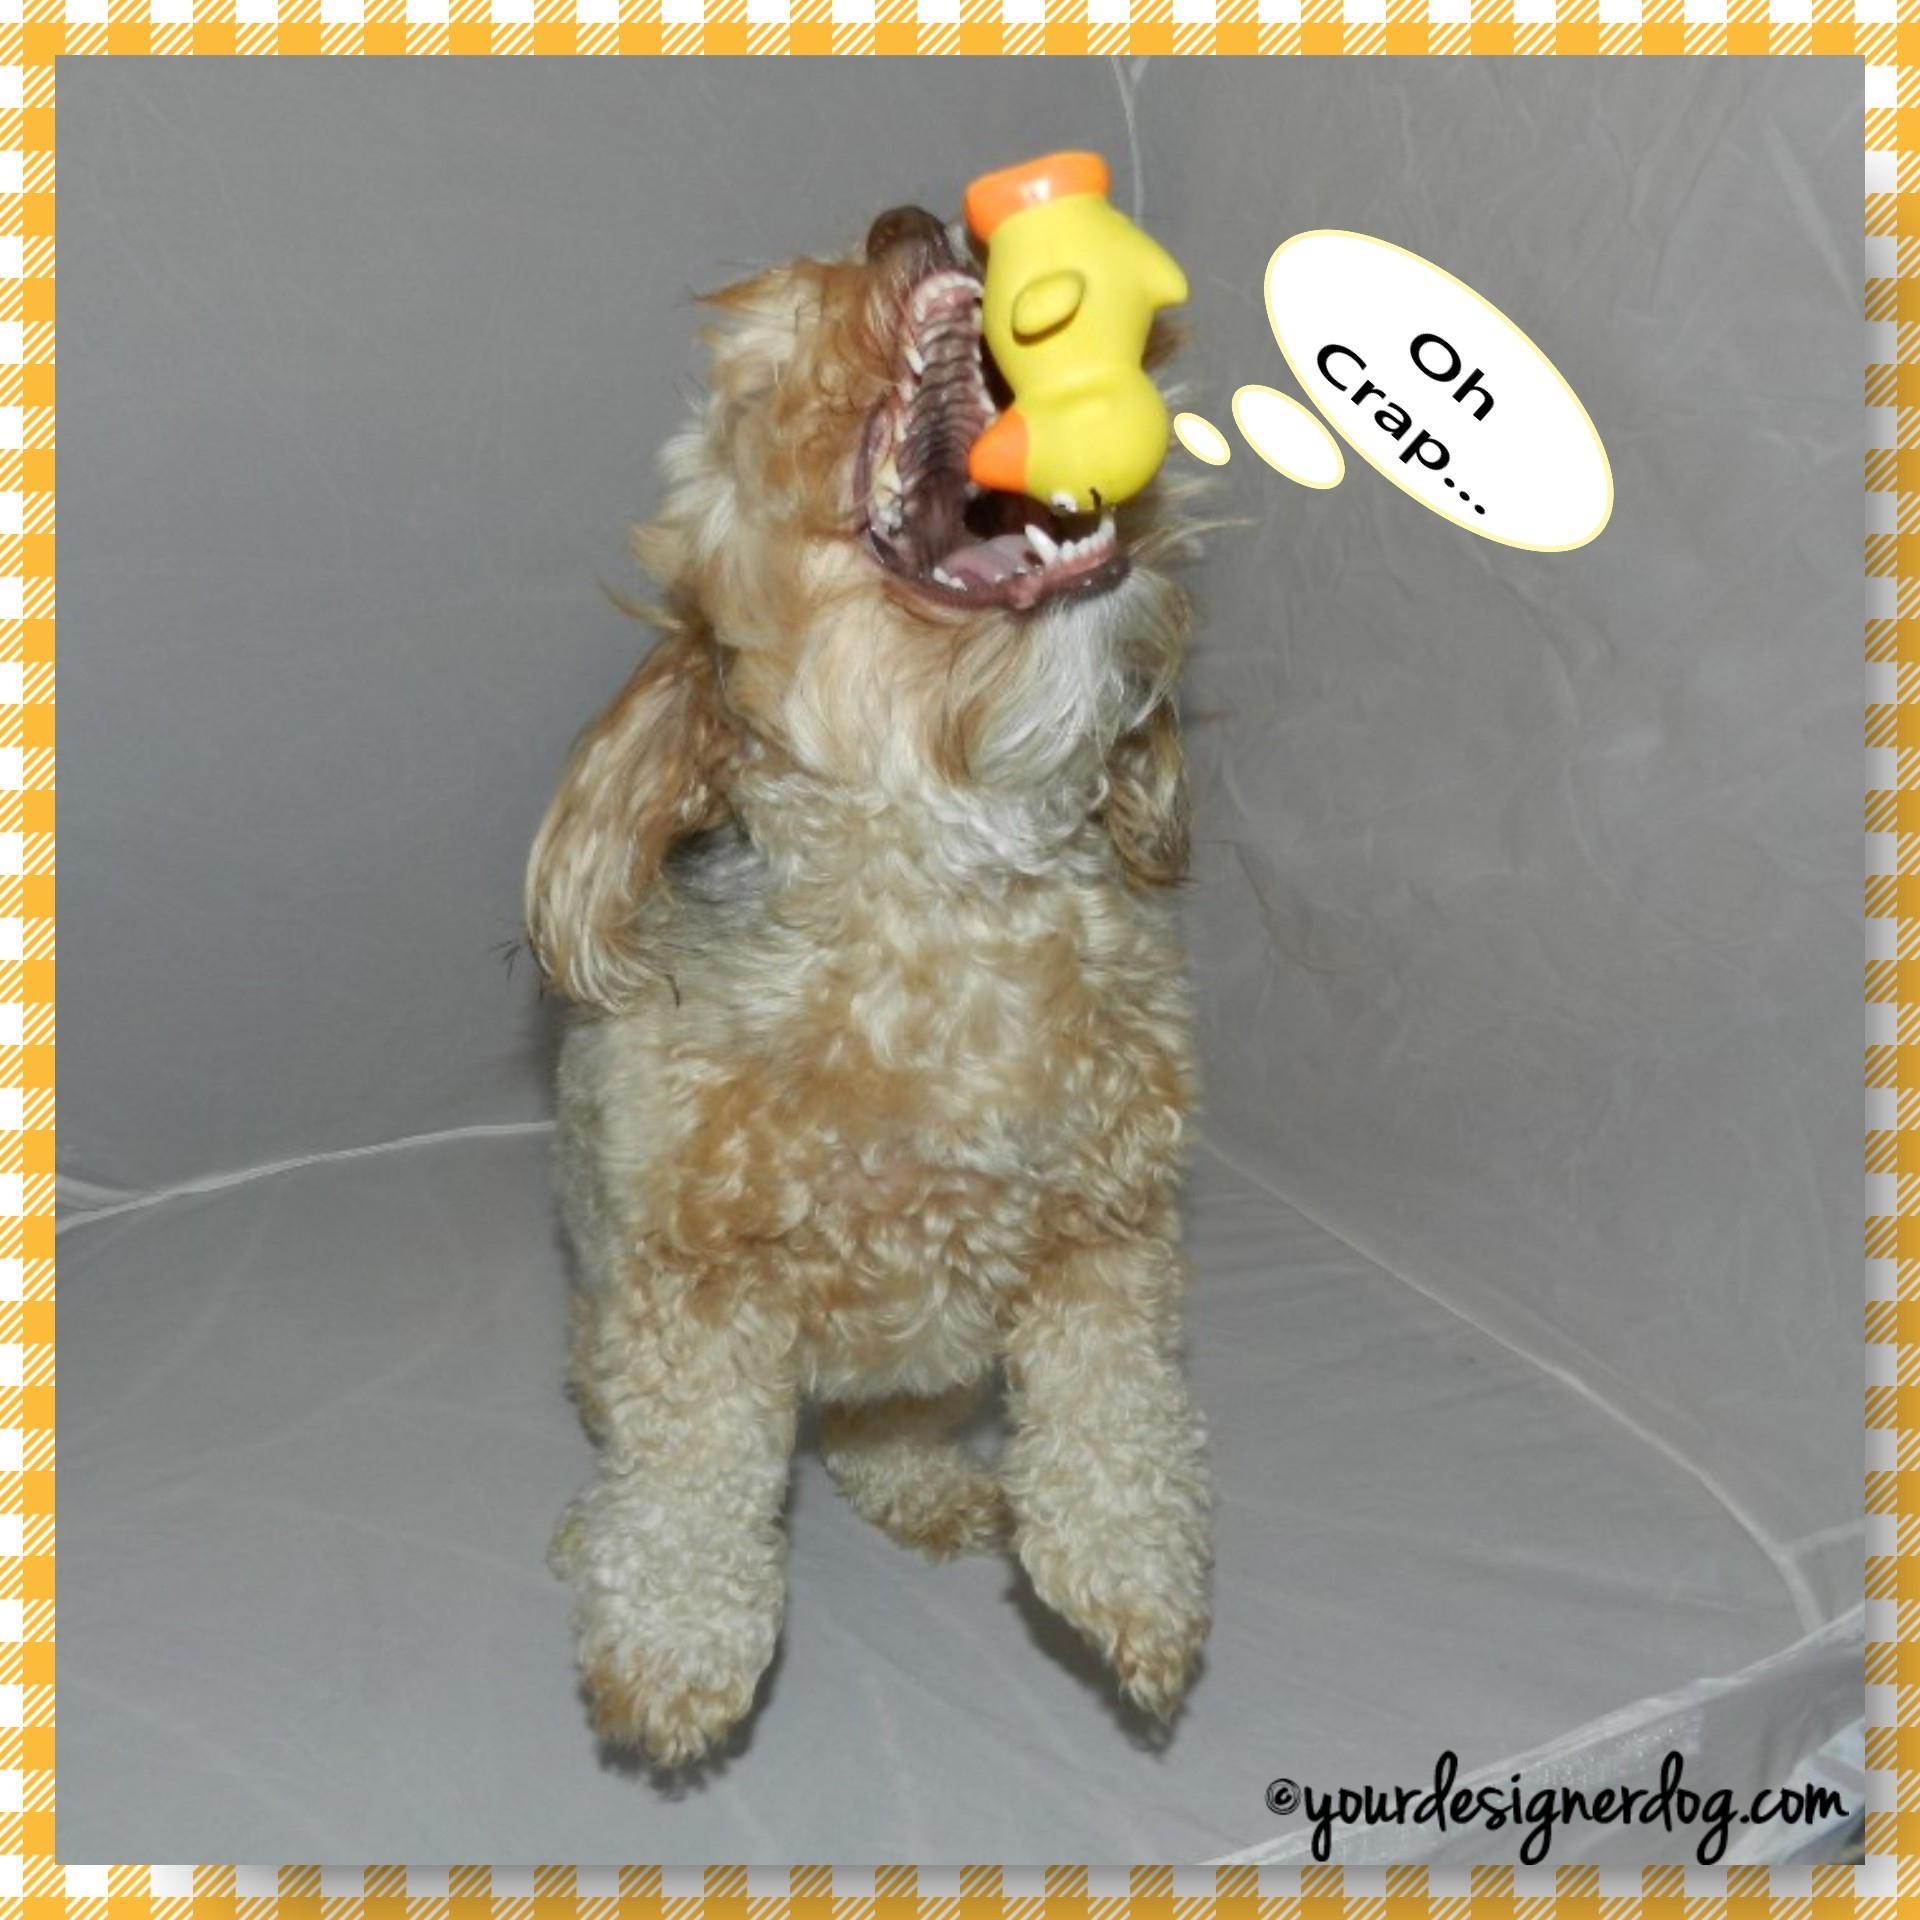 dogs, designer dogs, yorkipoo, yorkie poo, rubber ducky, catch